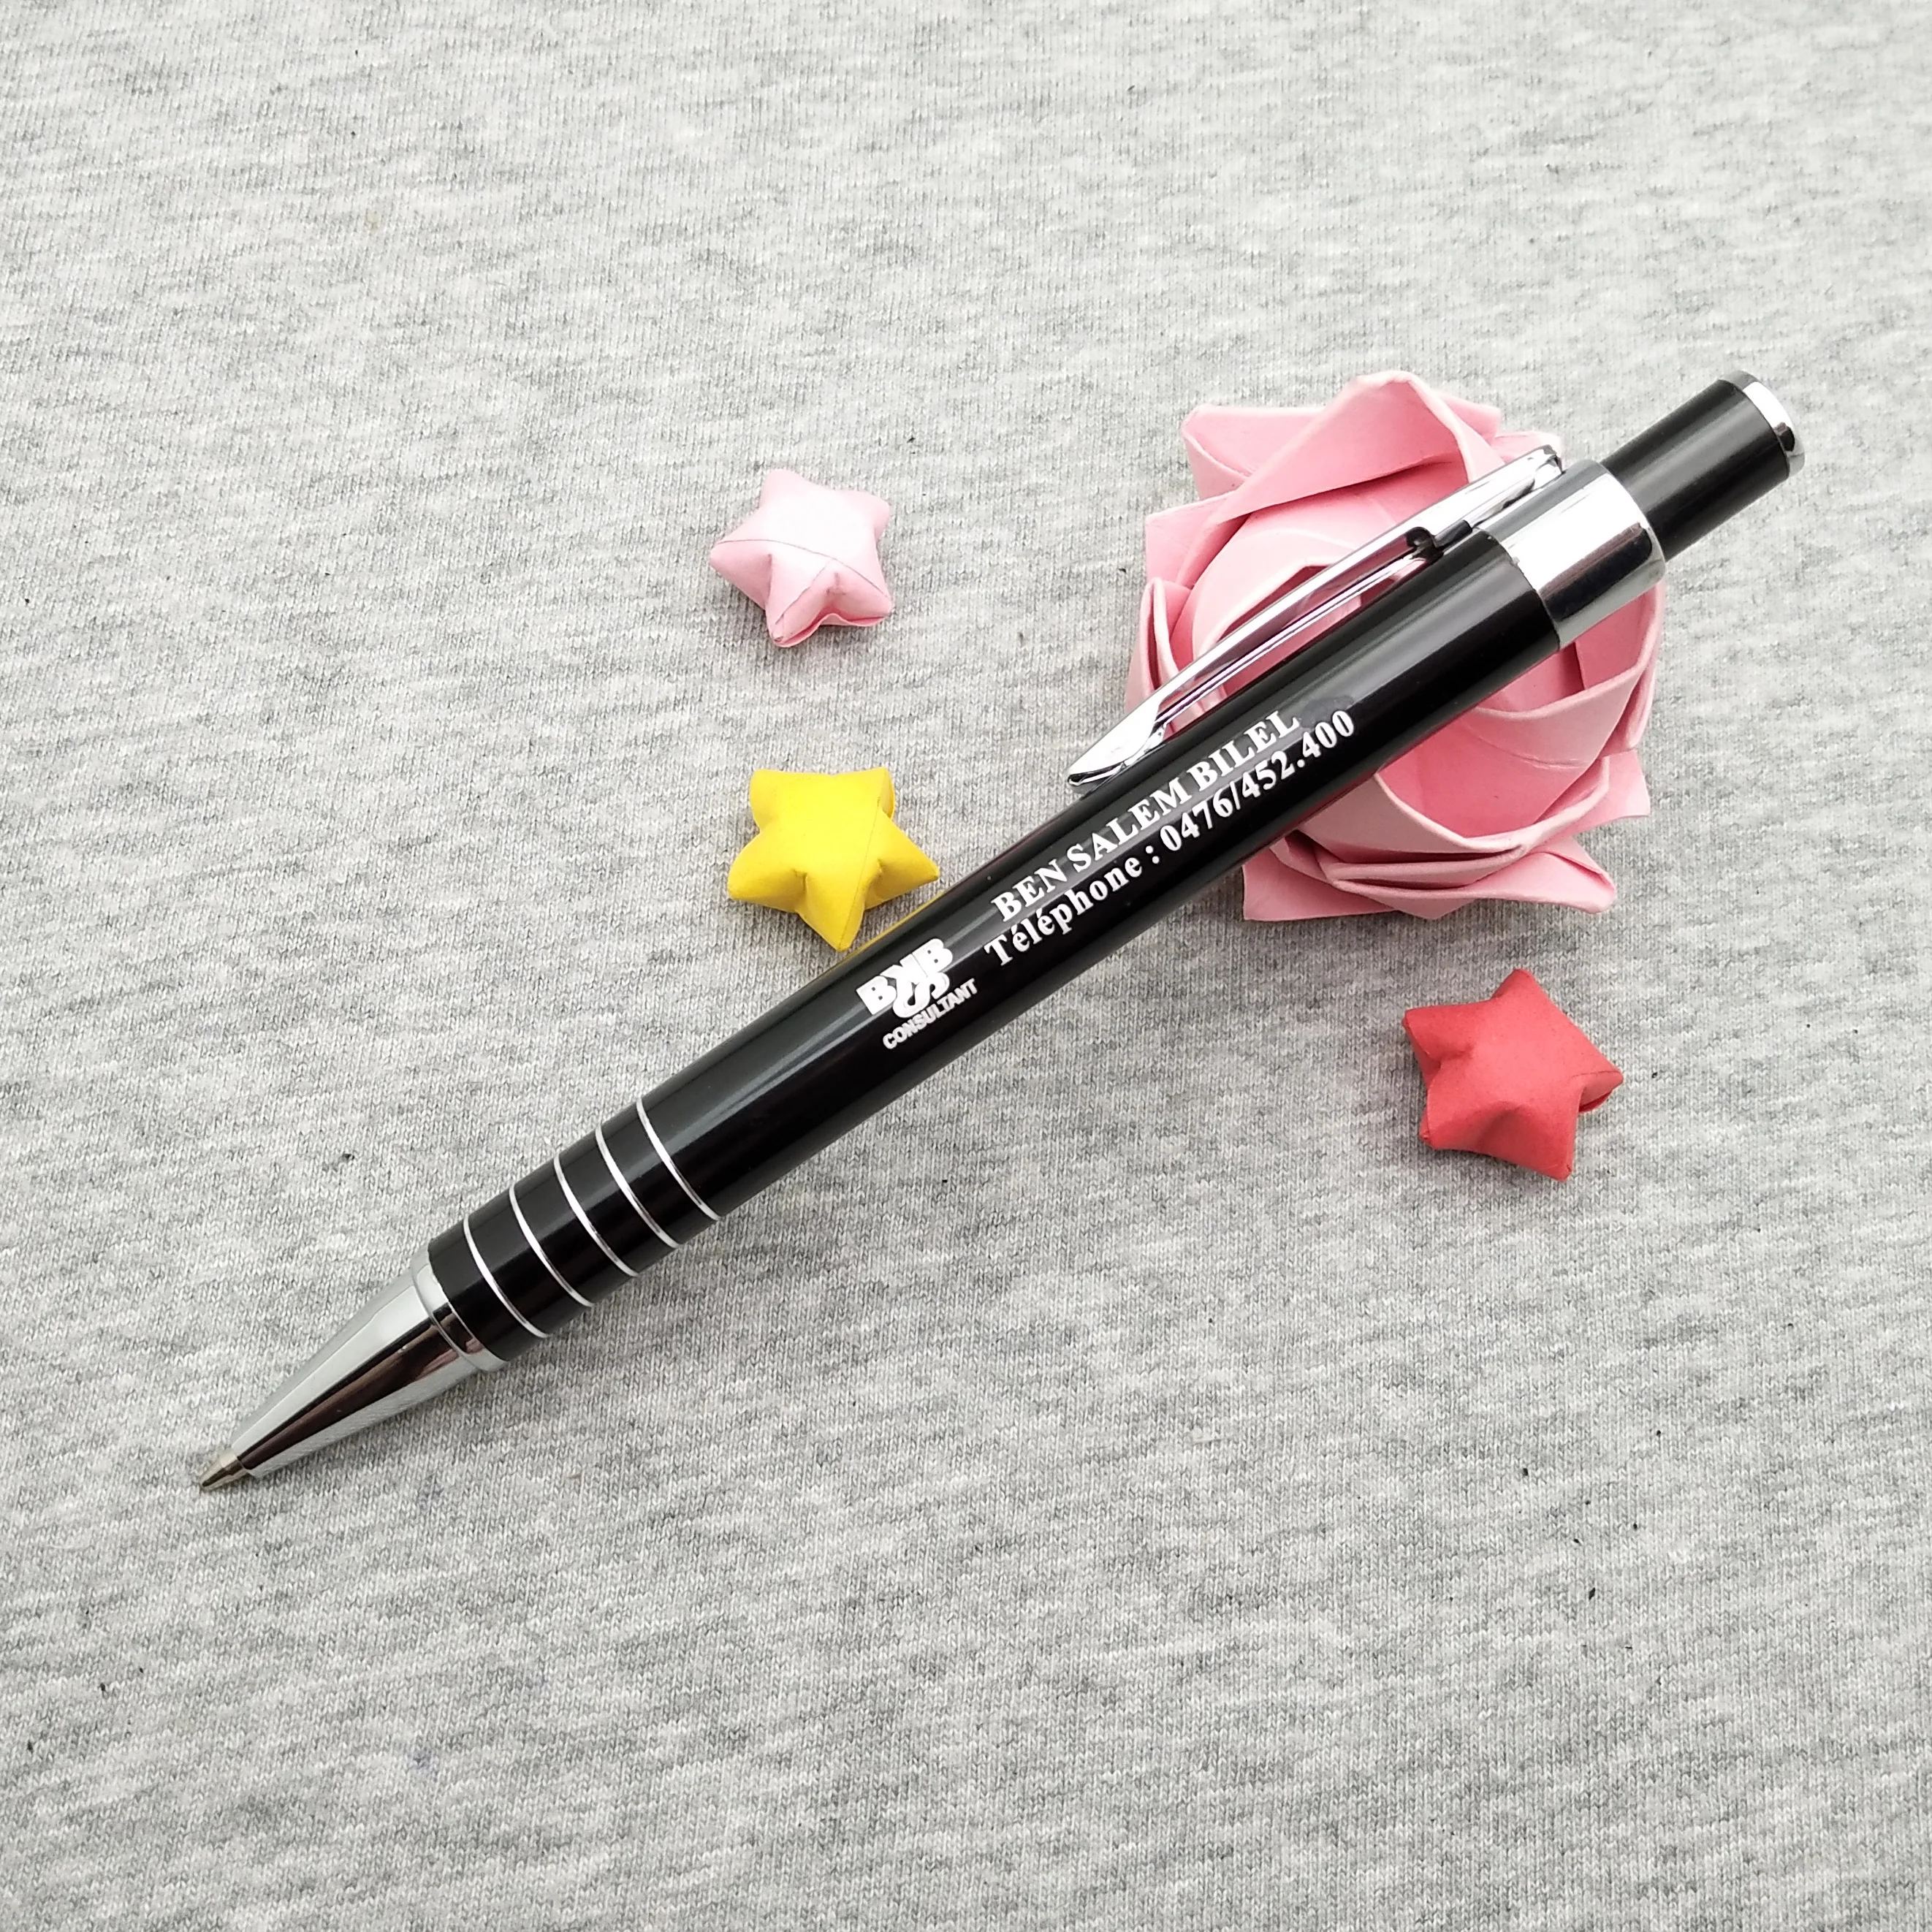 

Kawayii Nice Metal Writing Pen Customized Free With Name Text 40pcs a Lot For The Company Event and Party Favors